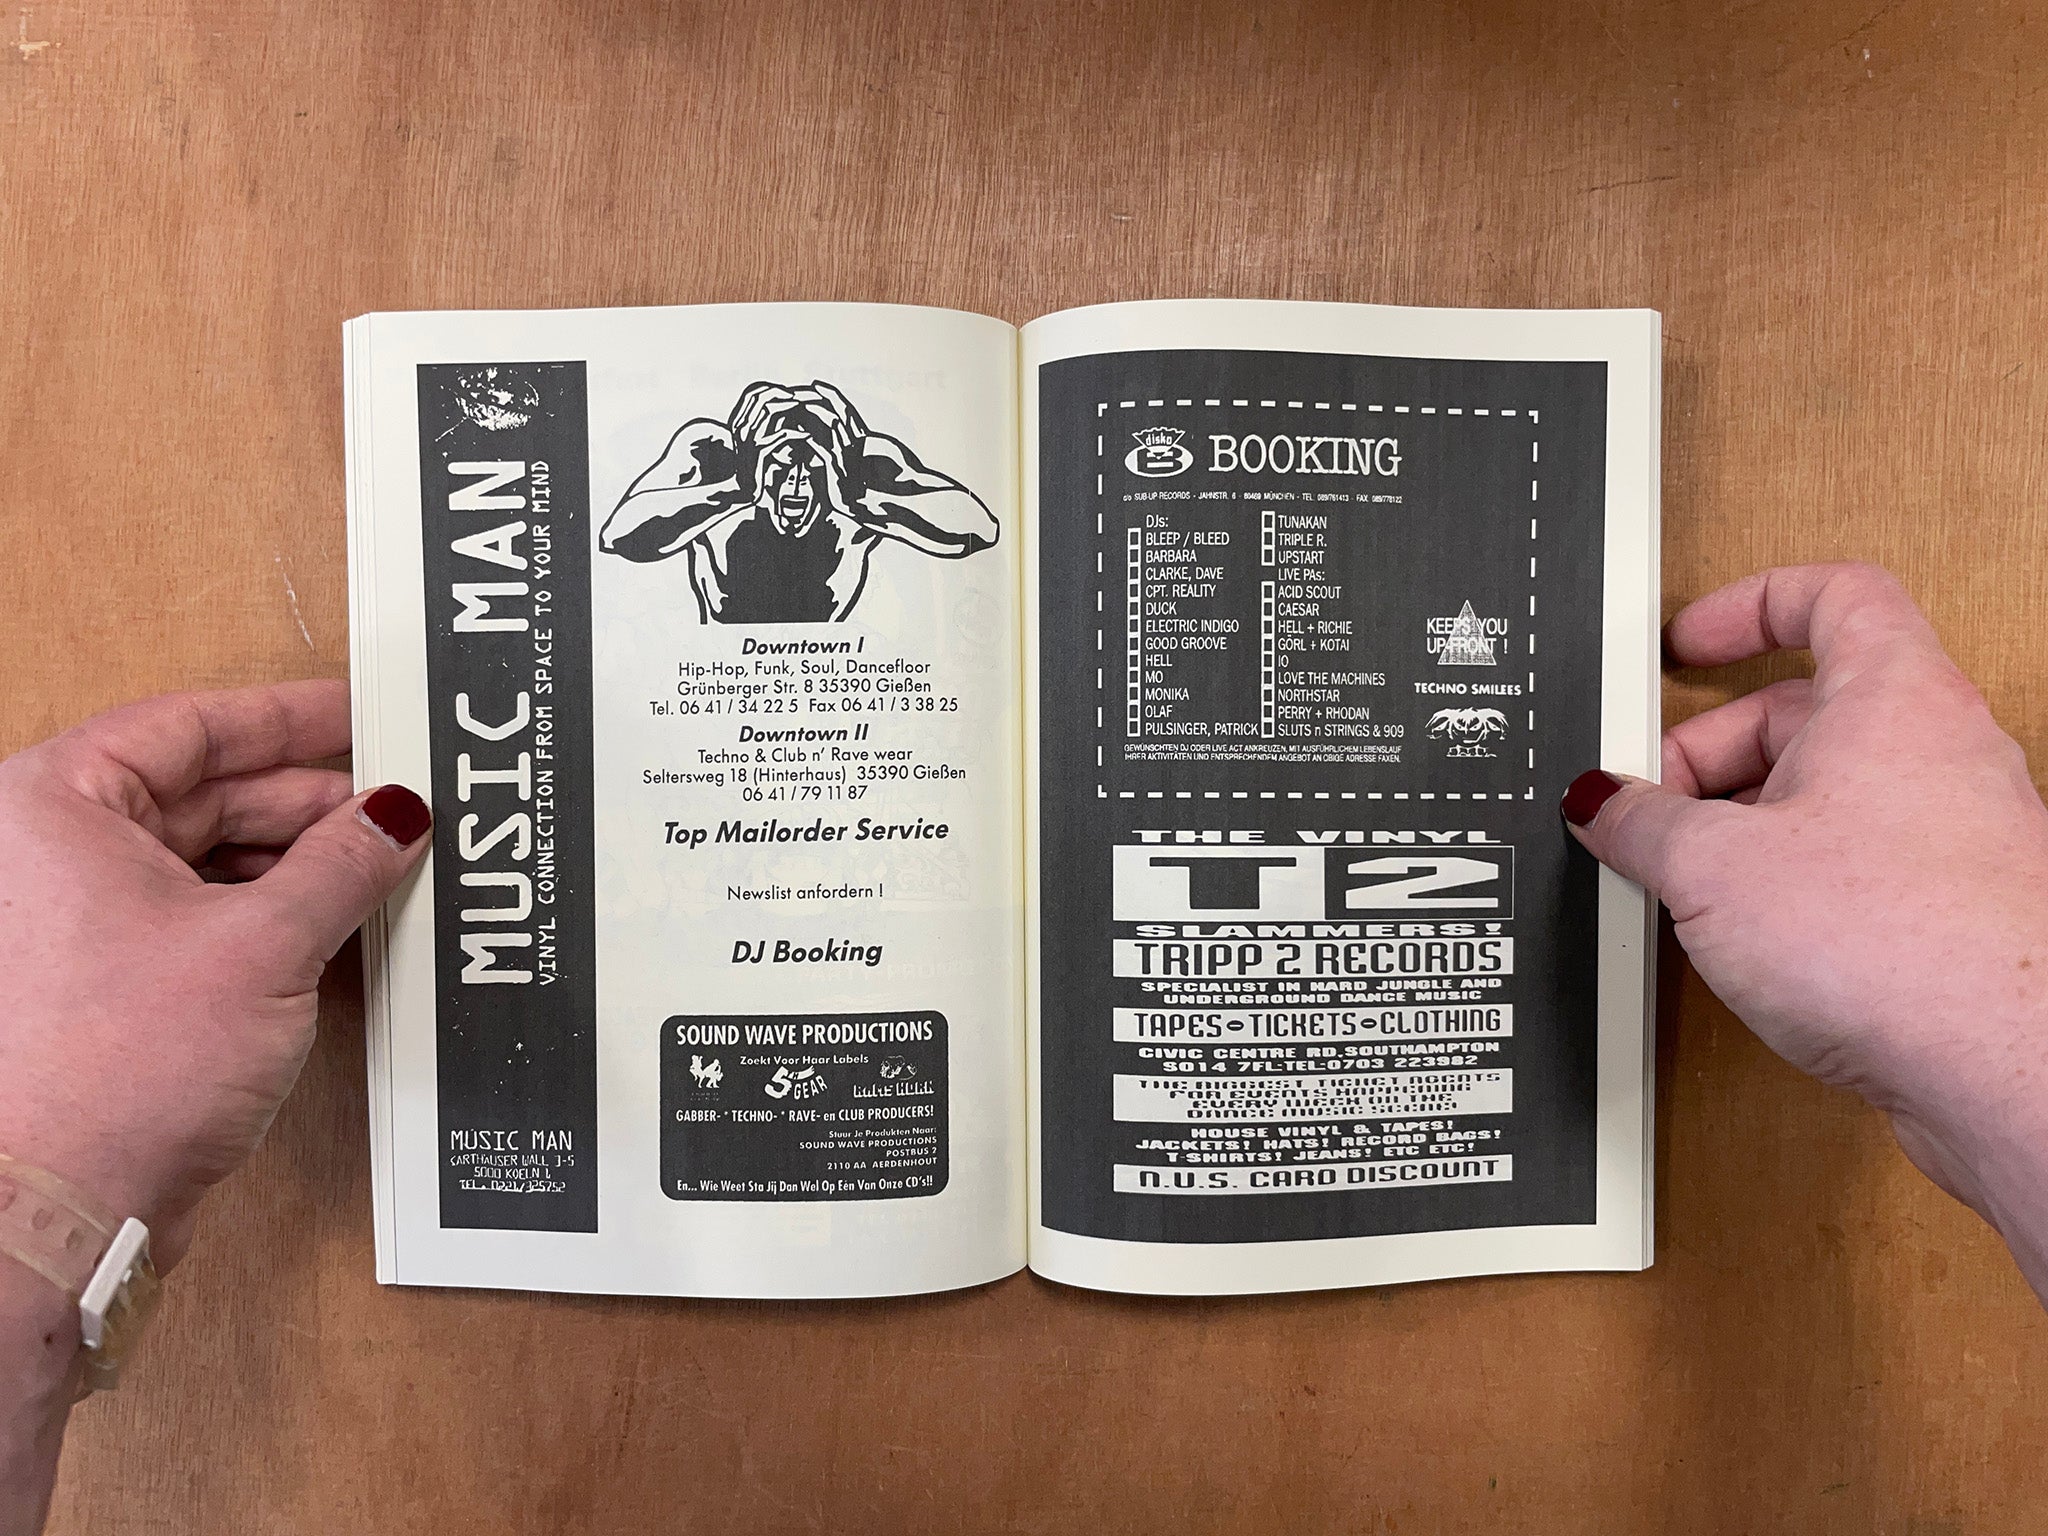 ARCHIVIO #1 – RECORDS STORE ADS AND PAPER EPHEMERA FROM RAVE FANZINES OF THE EARLY 90S